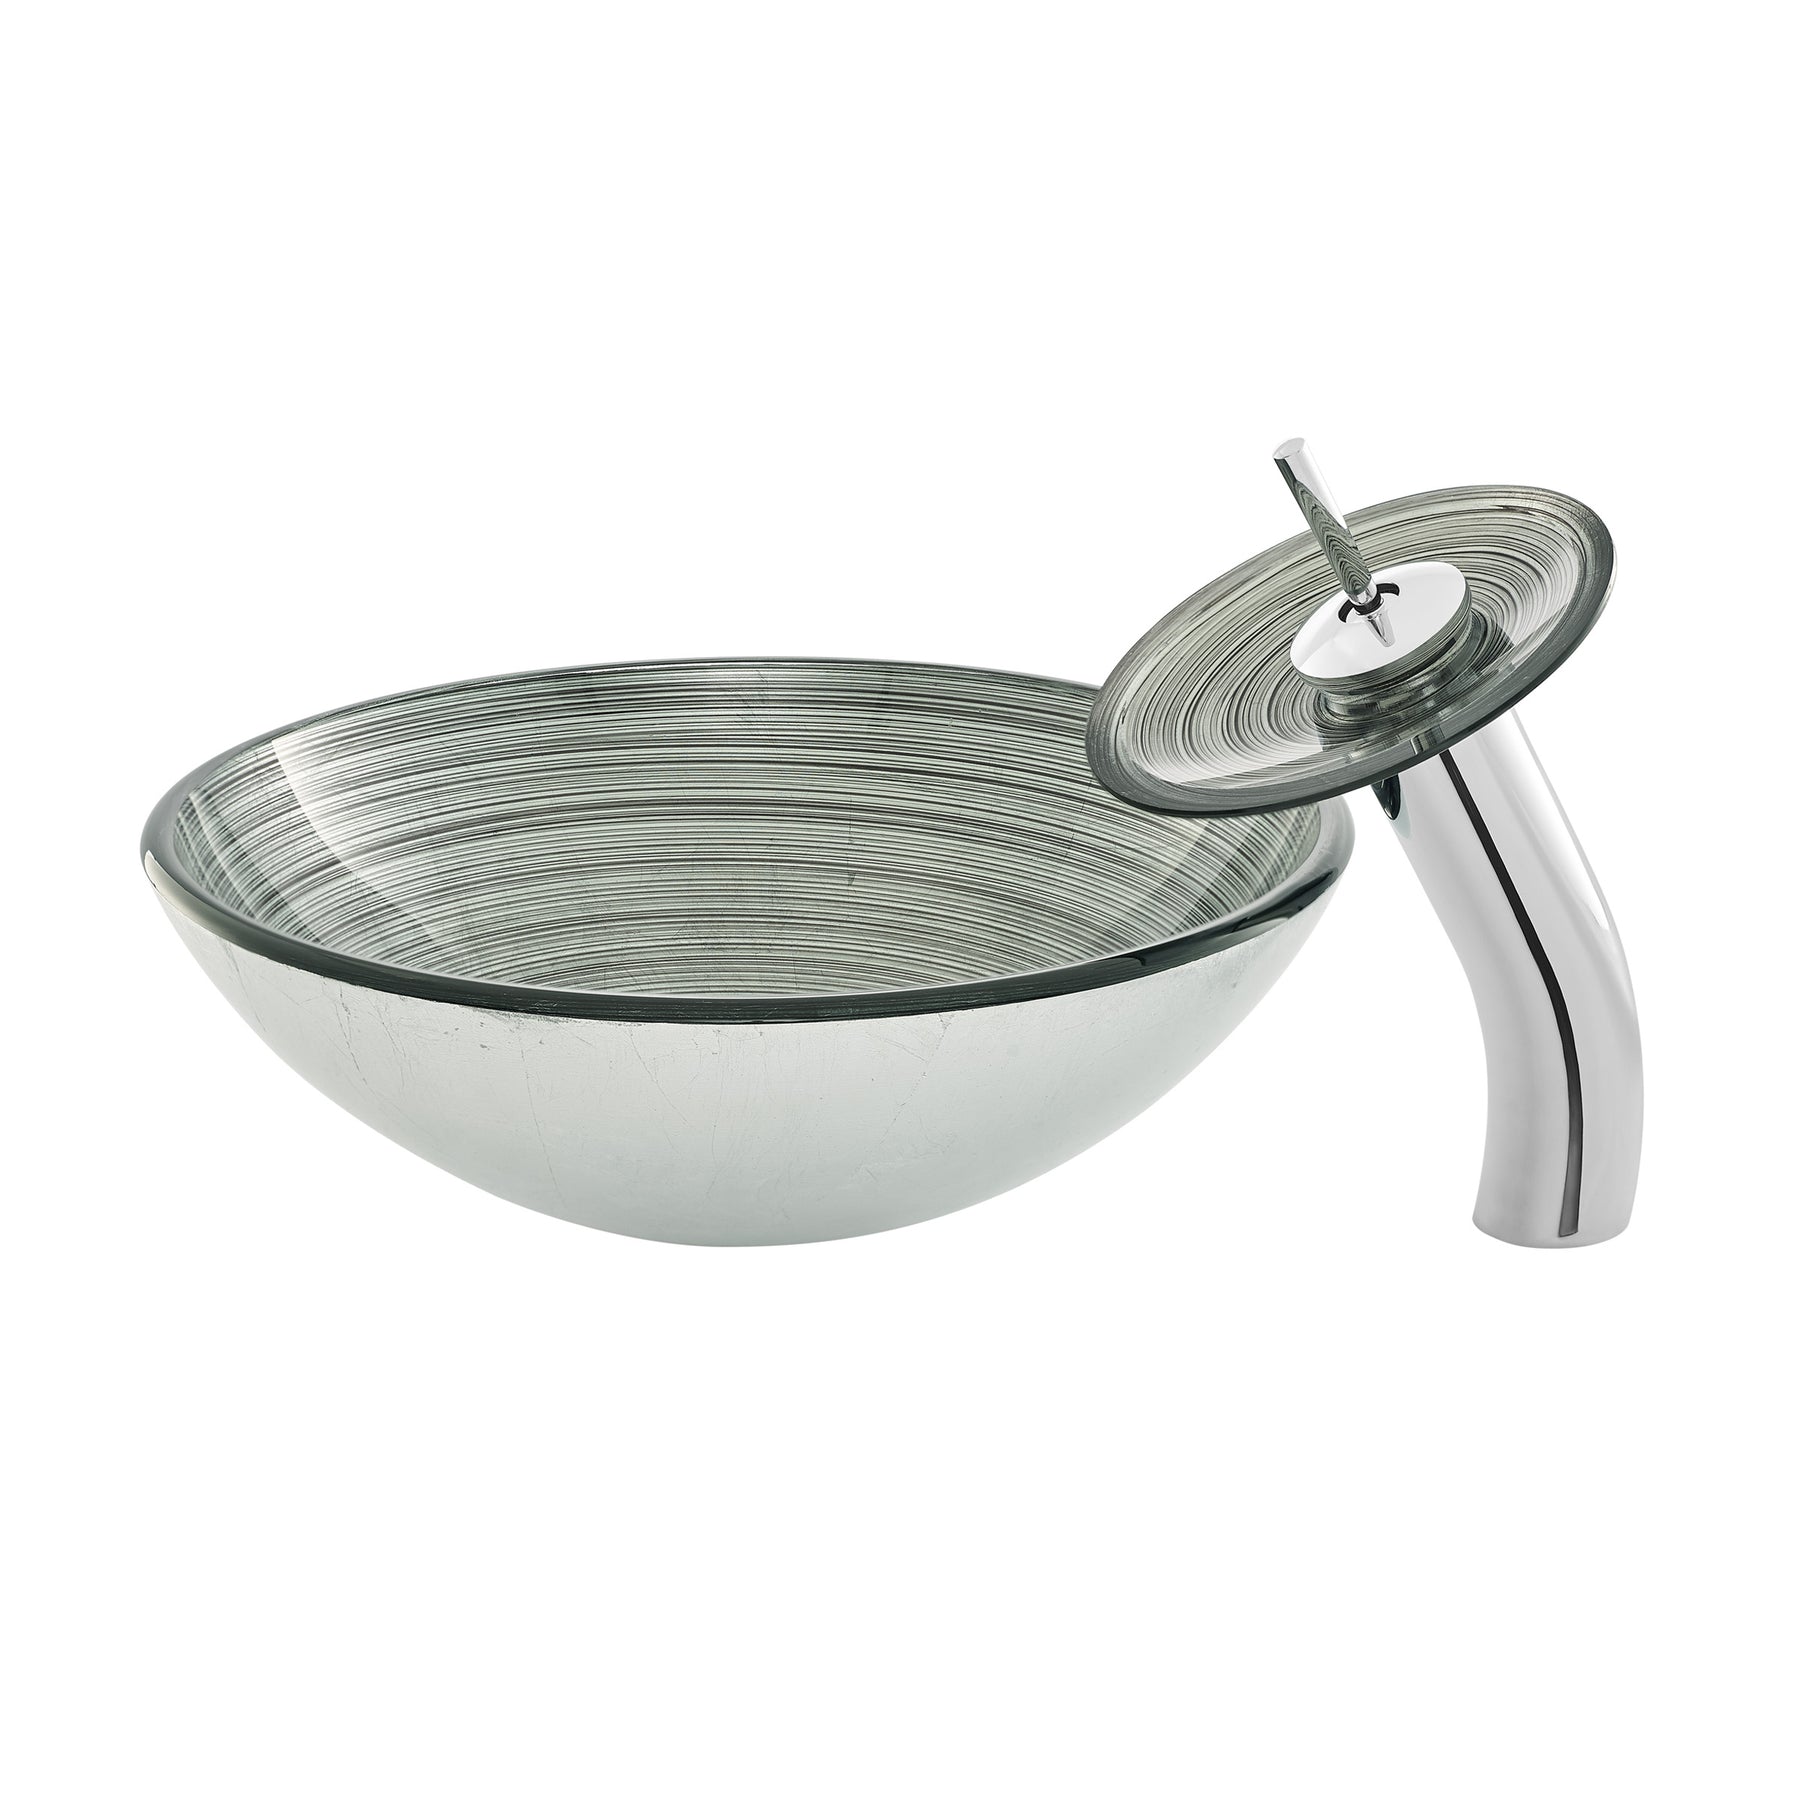 Swiss Madison Cascade 16.5 Glass Vessel Sink with Faucet - SM-VSF2